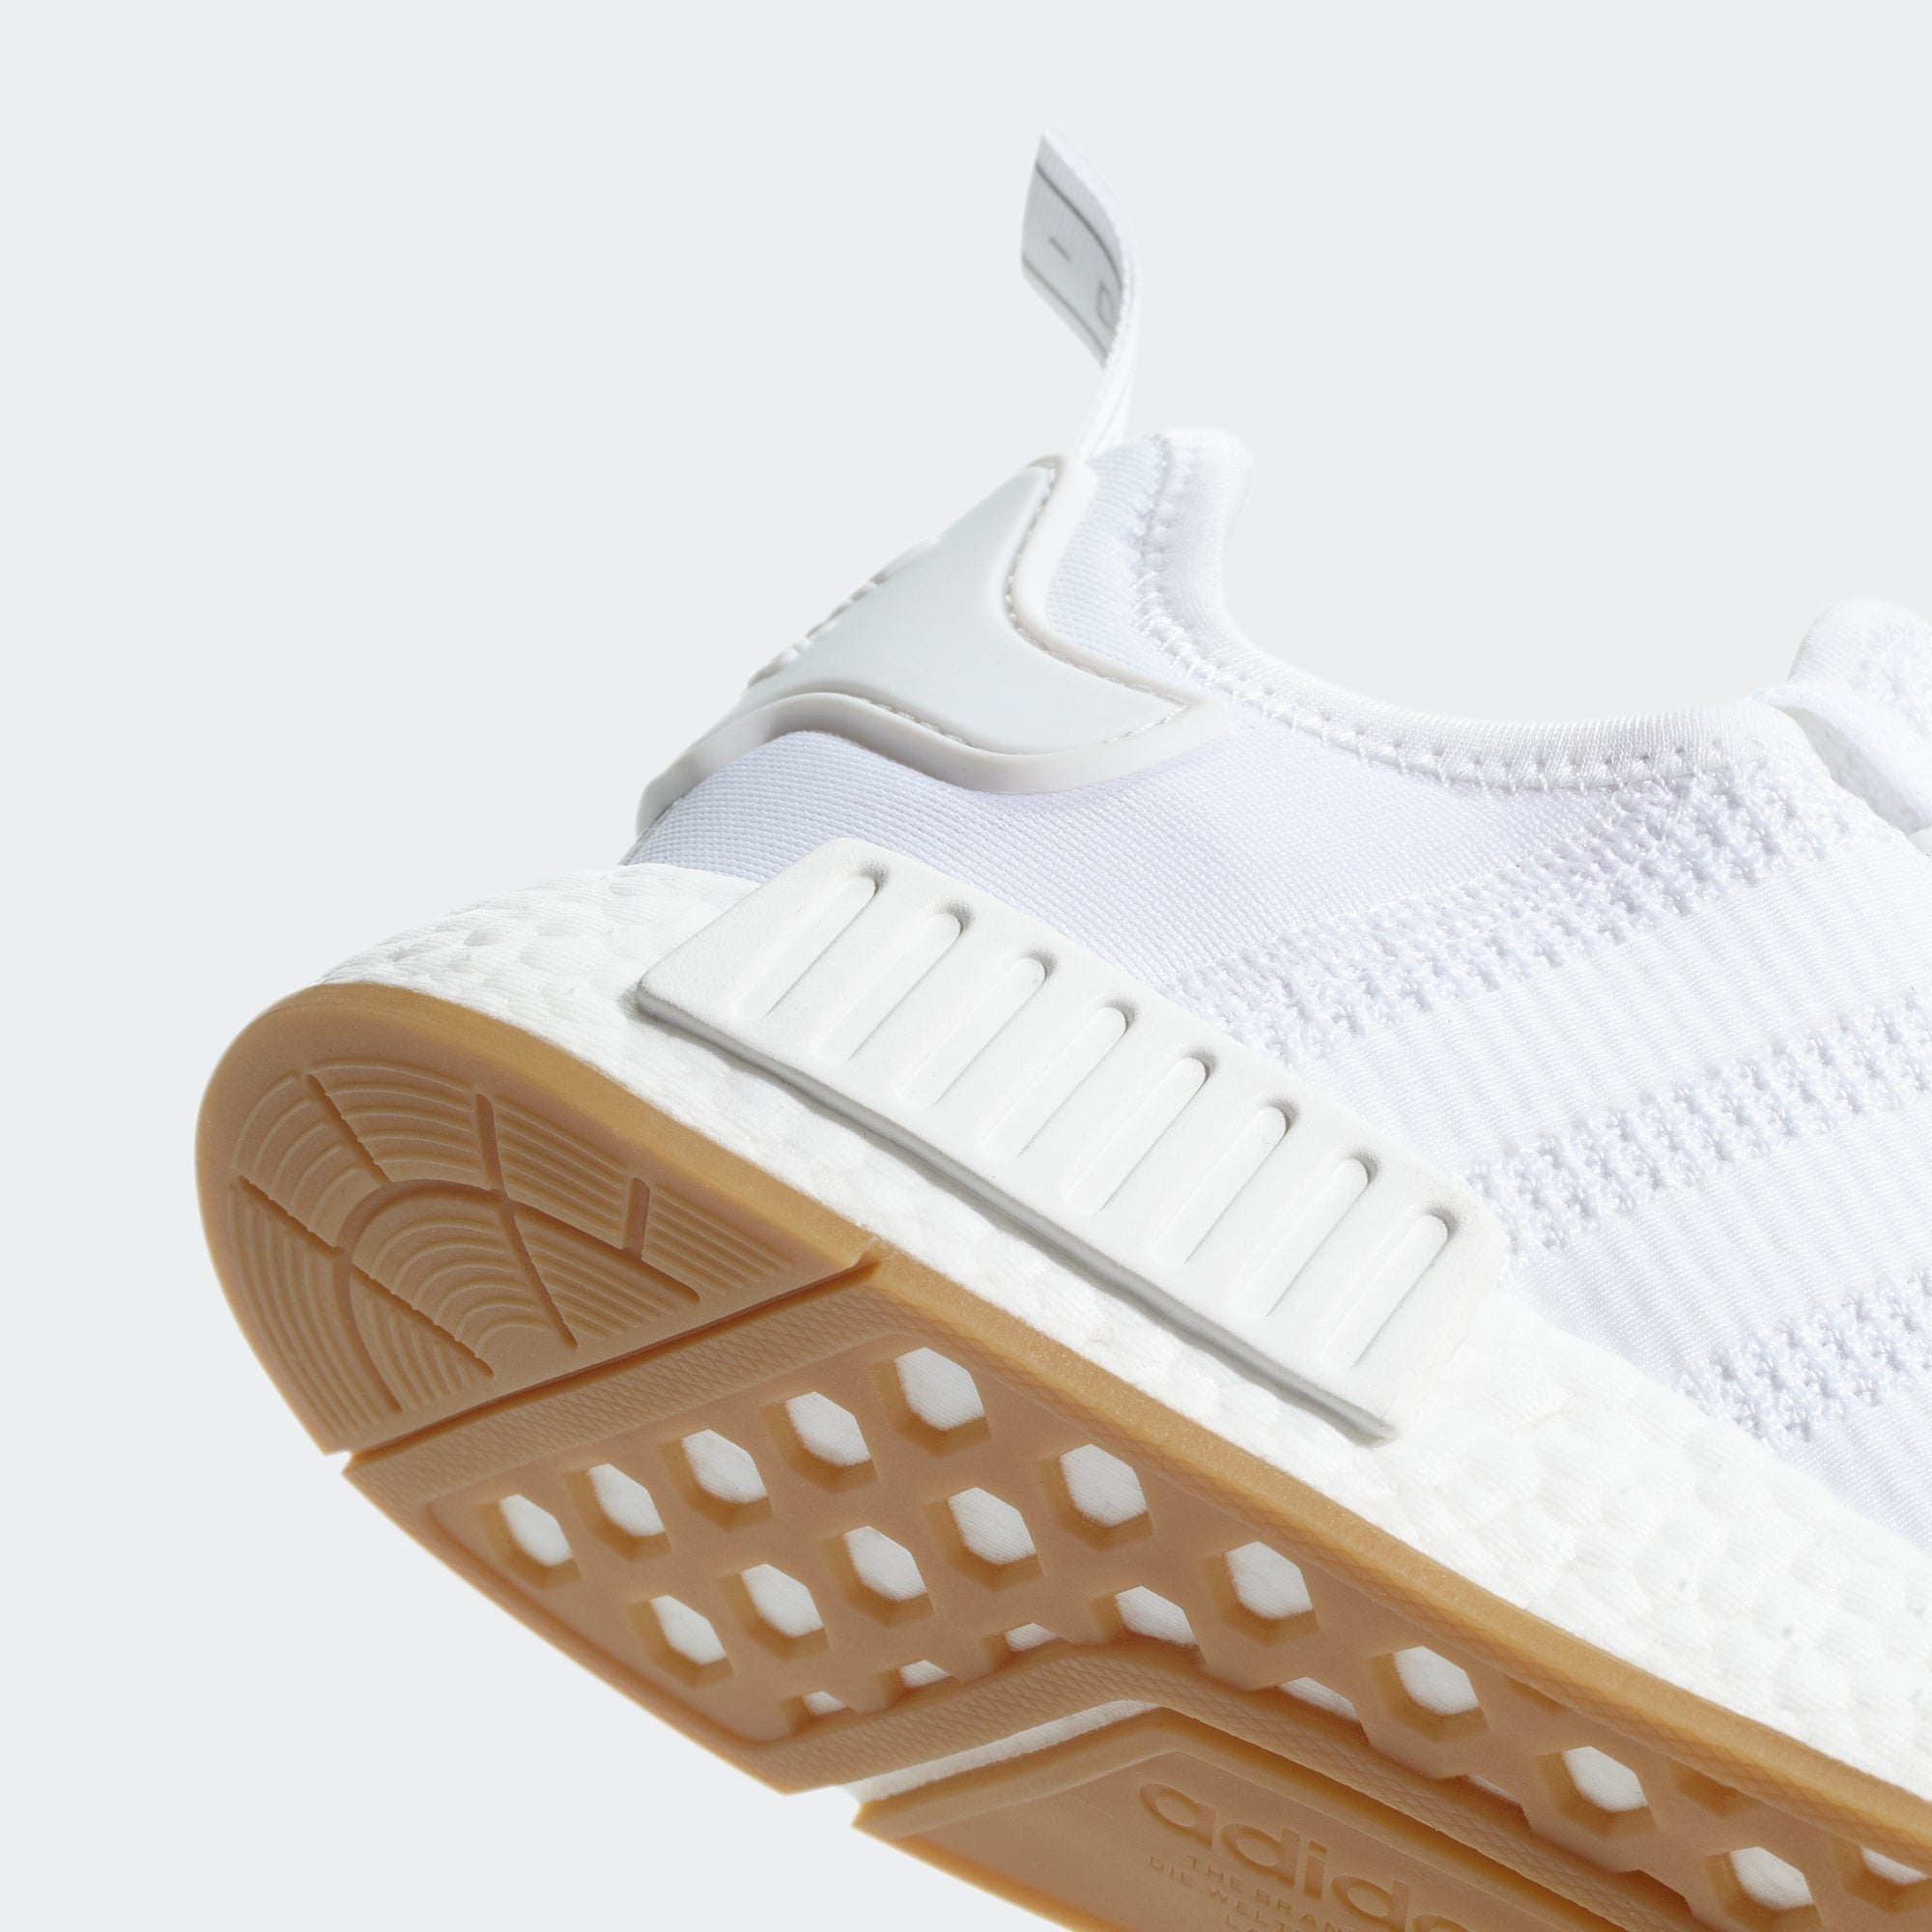 Adidas NMD R1 &White/Gum& Shoes - Size 9